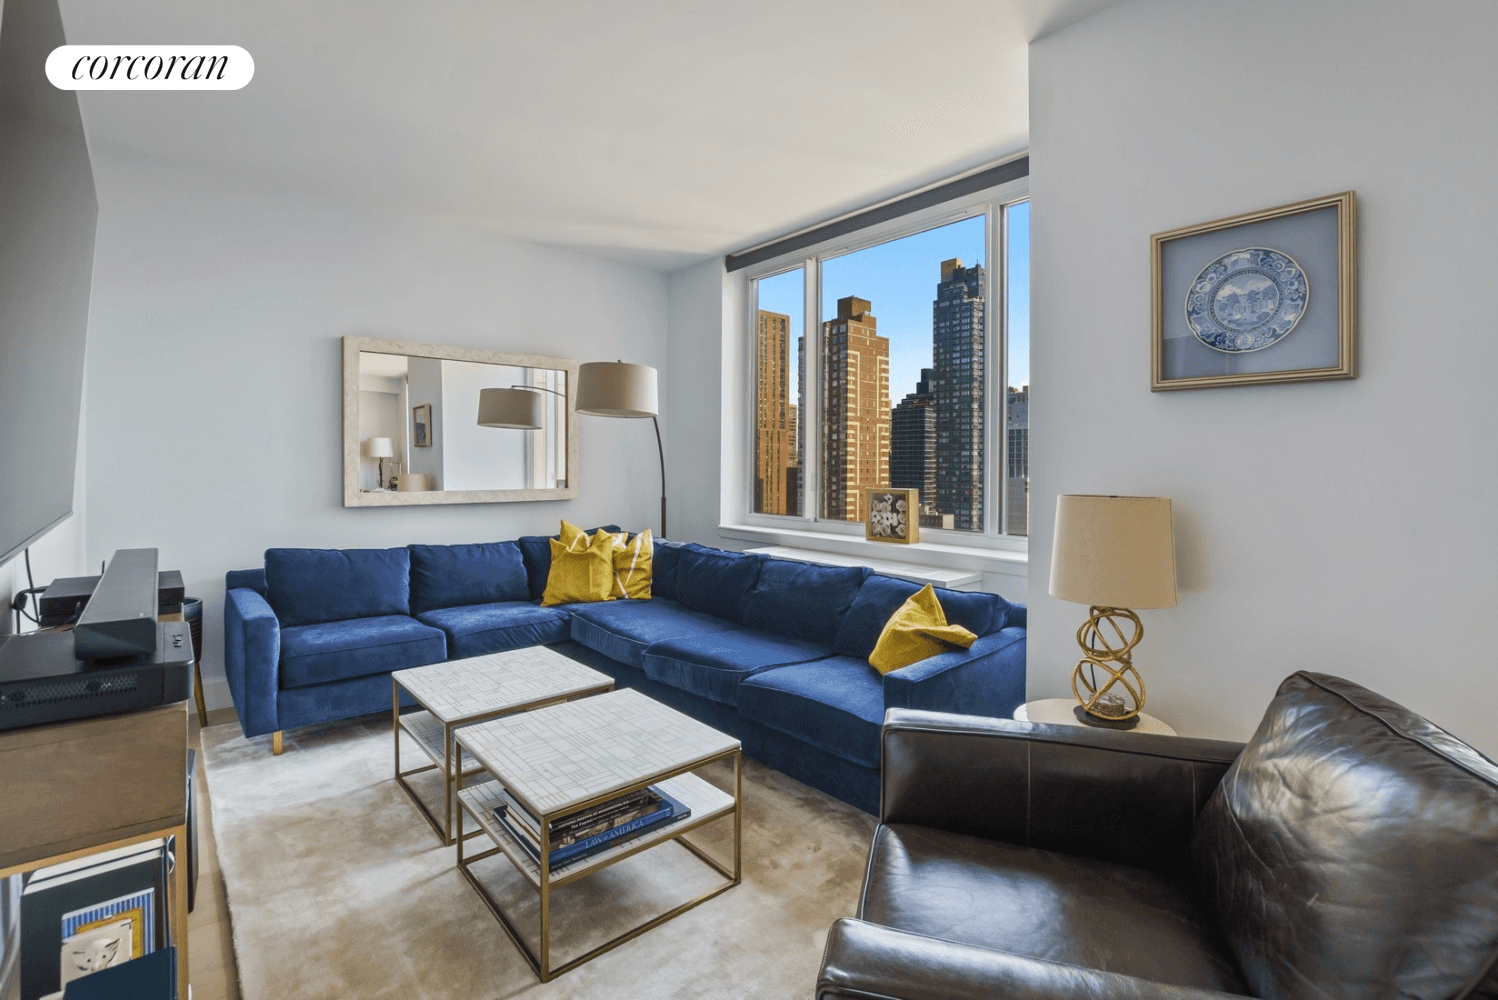 This bright Upper East Side one bedroom plus den home office with in unit washer dryer and sweeping city views is a fabulous place to call home !